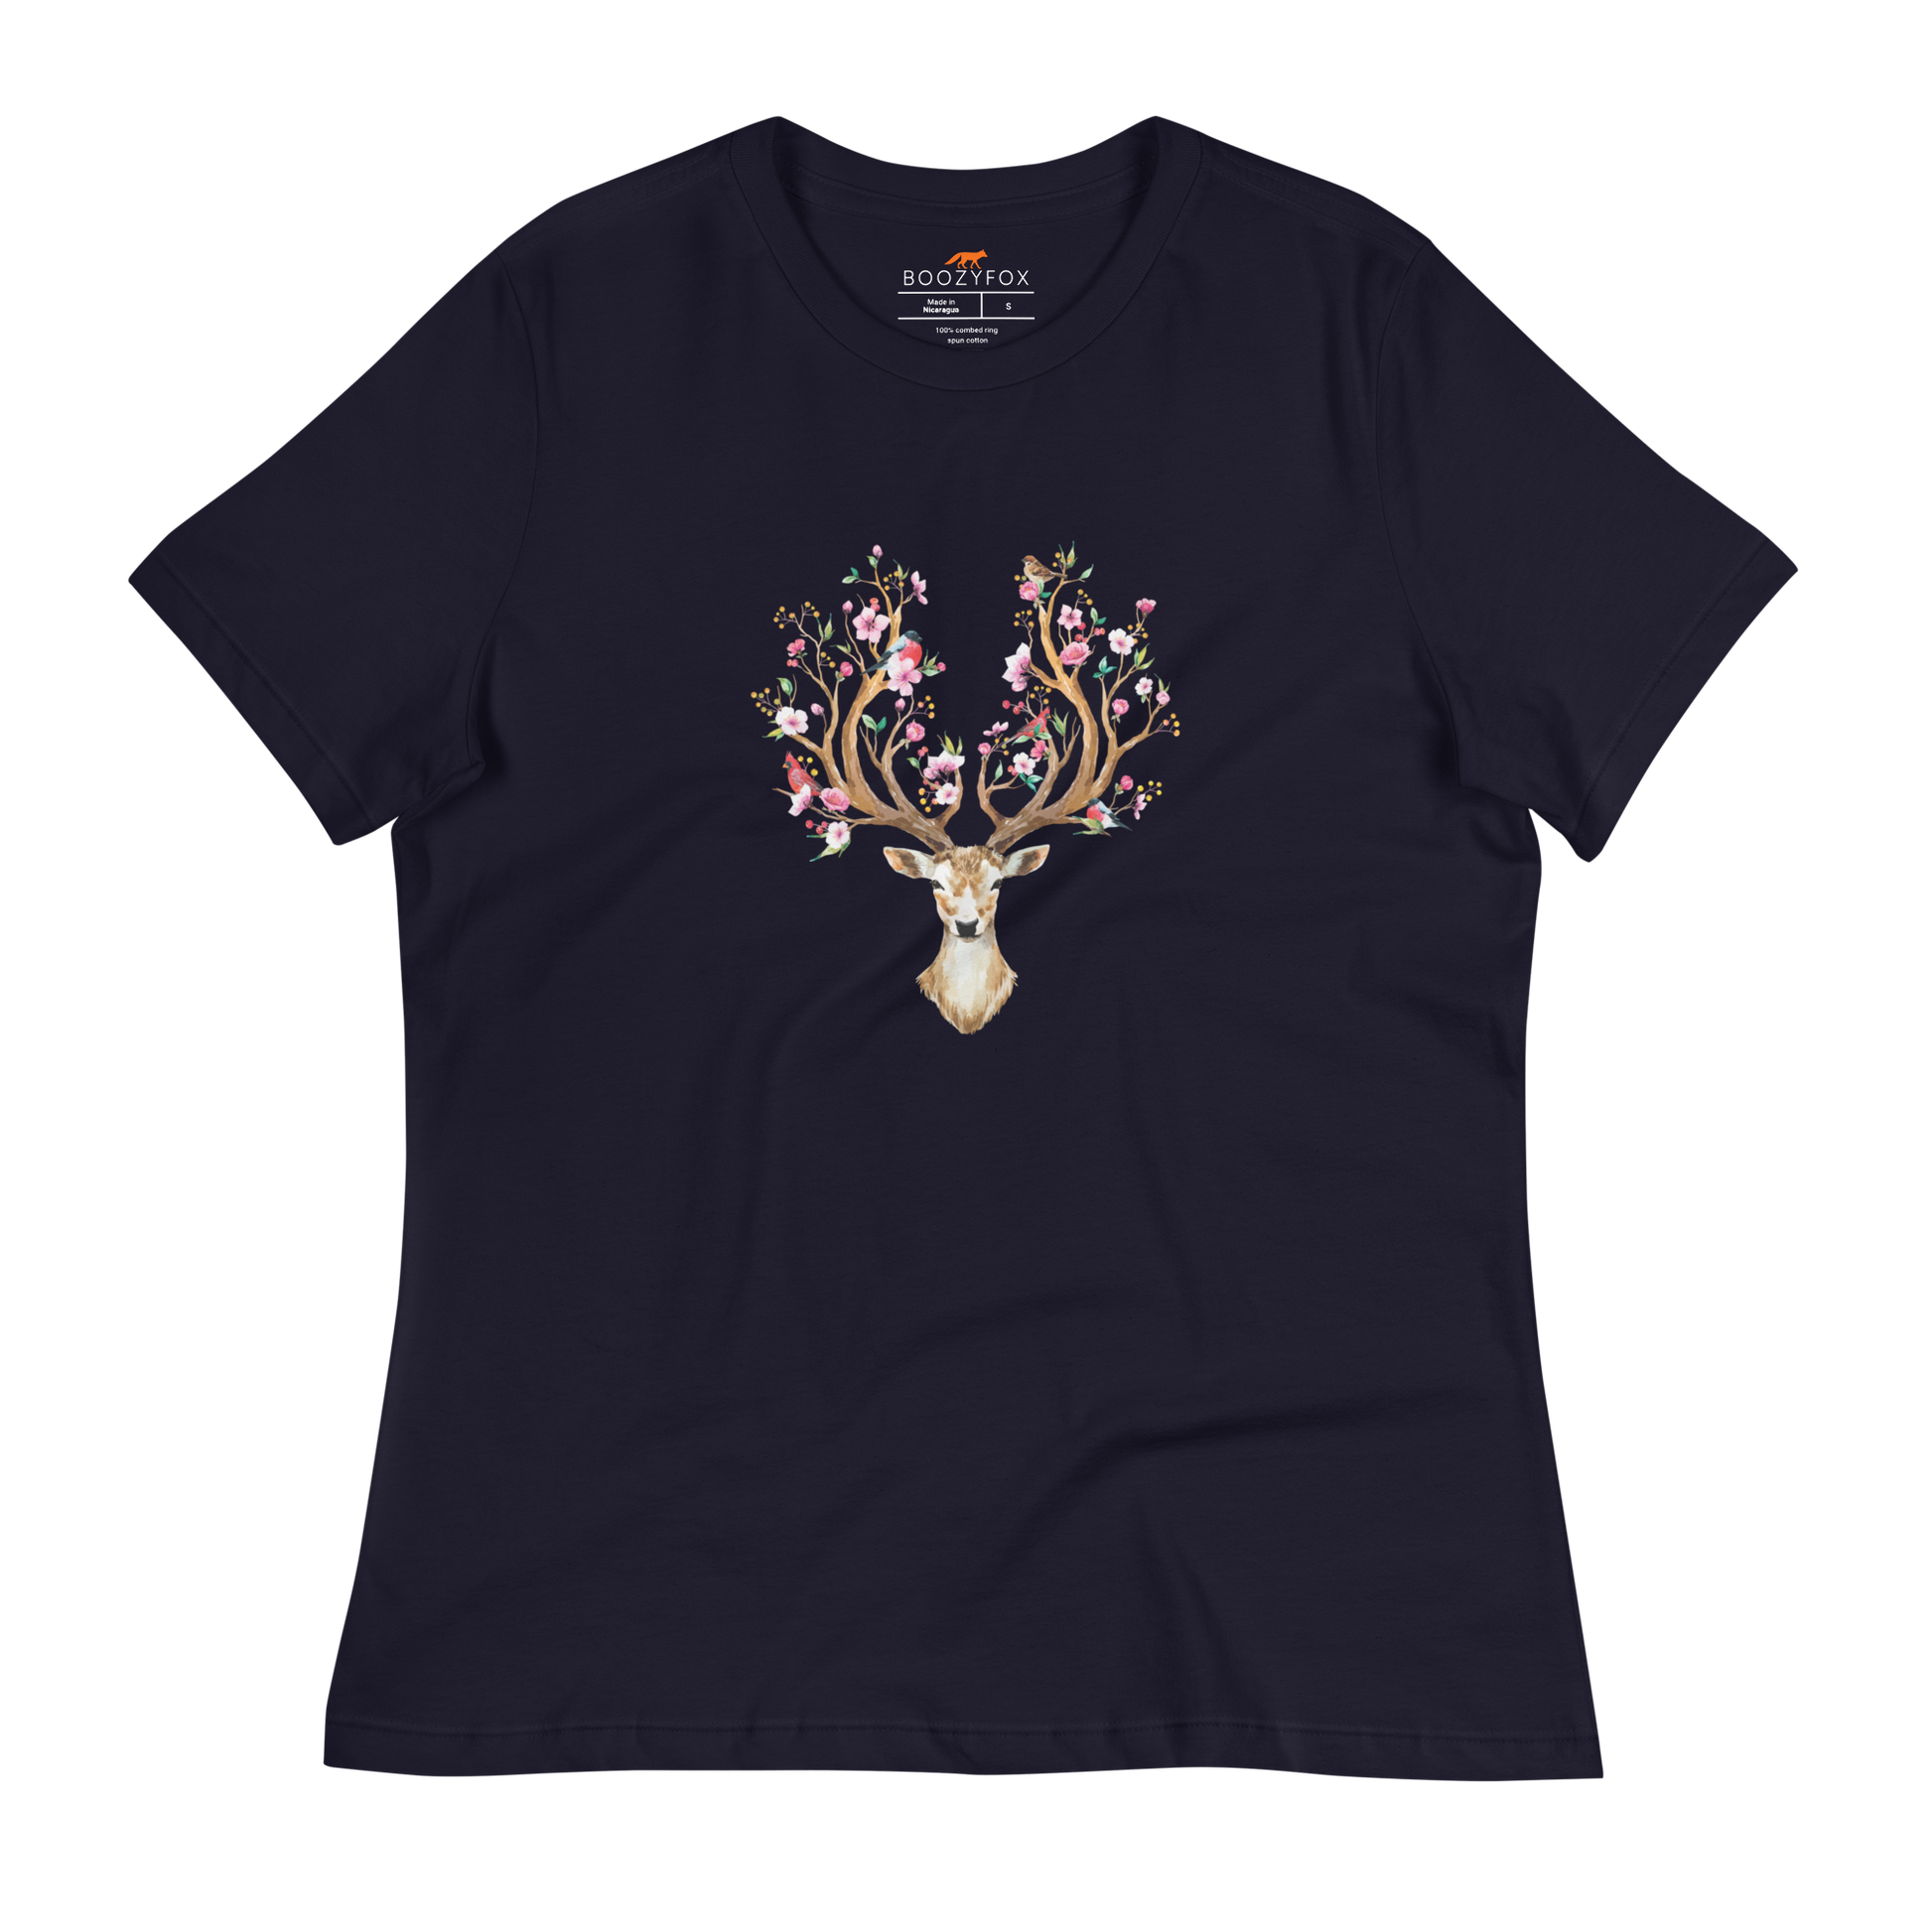 Women's relaxed navy Deer t-shirt featuring an eye-catching Floral Red Deer graphic on the chest - Women's Graphic Deer Tees - Boozy Fox